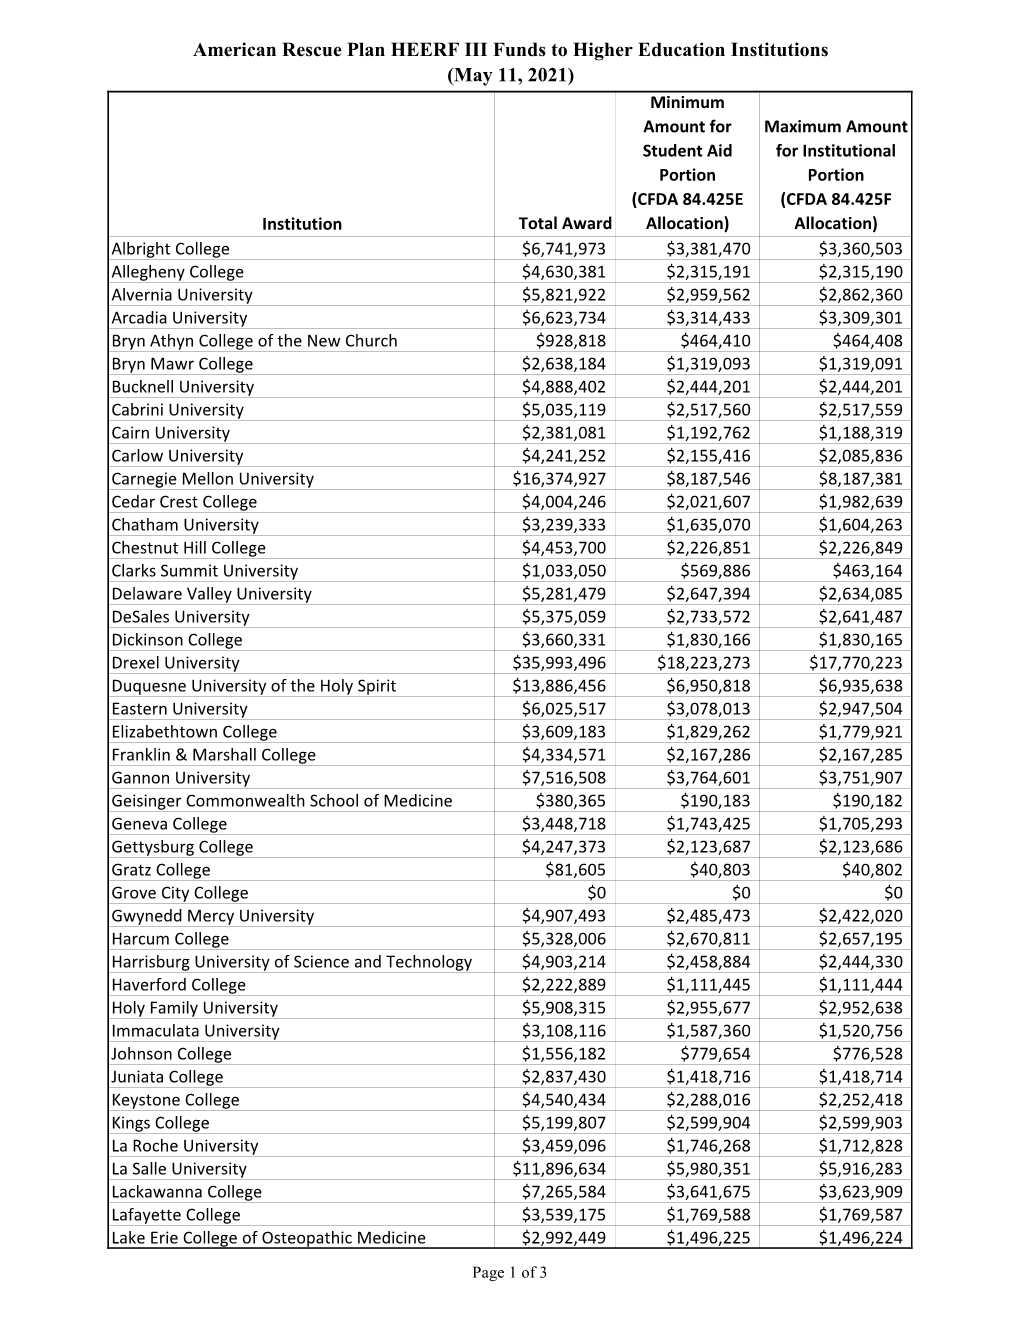 2021May11 USDOE Allocation of ARP Funds to Institutions in PA.Xlsx